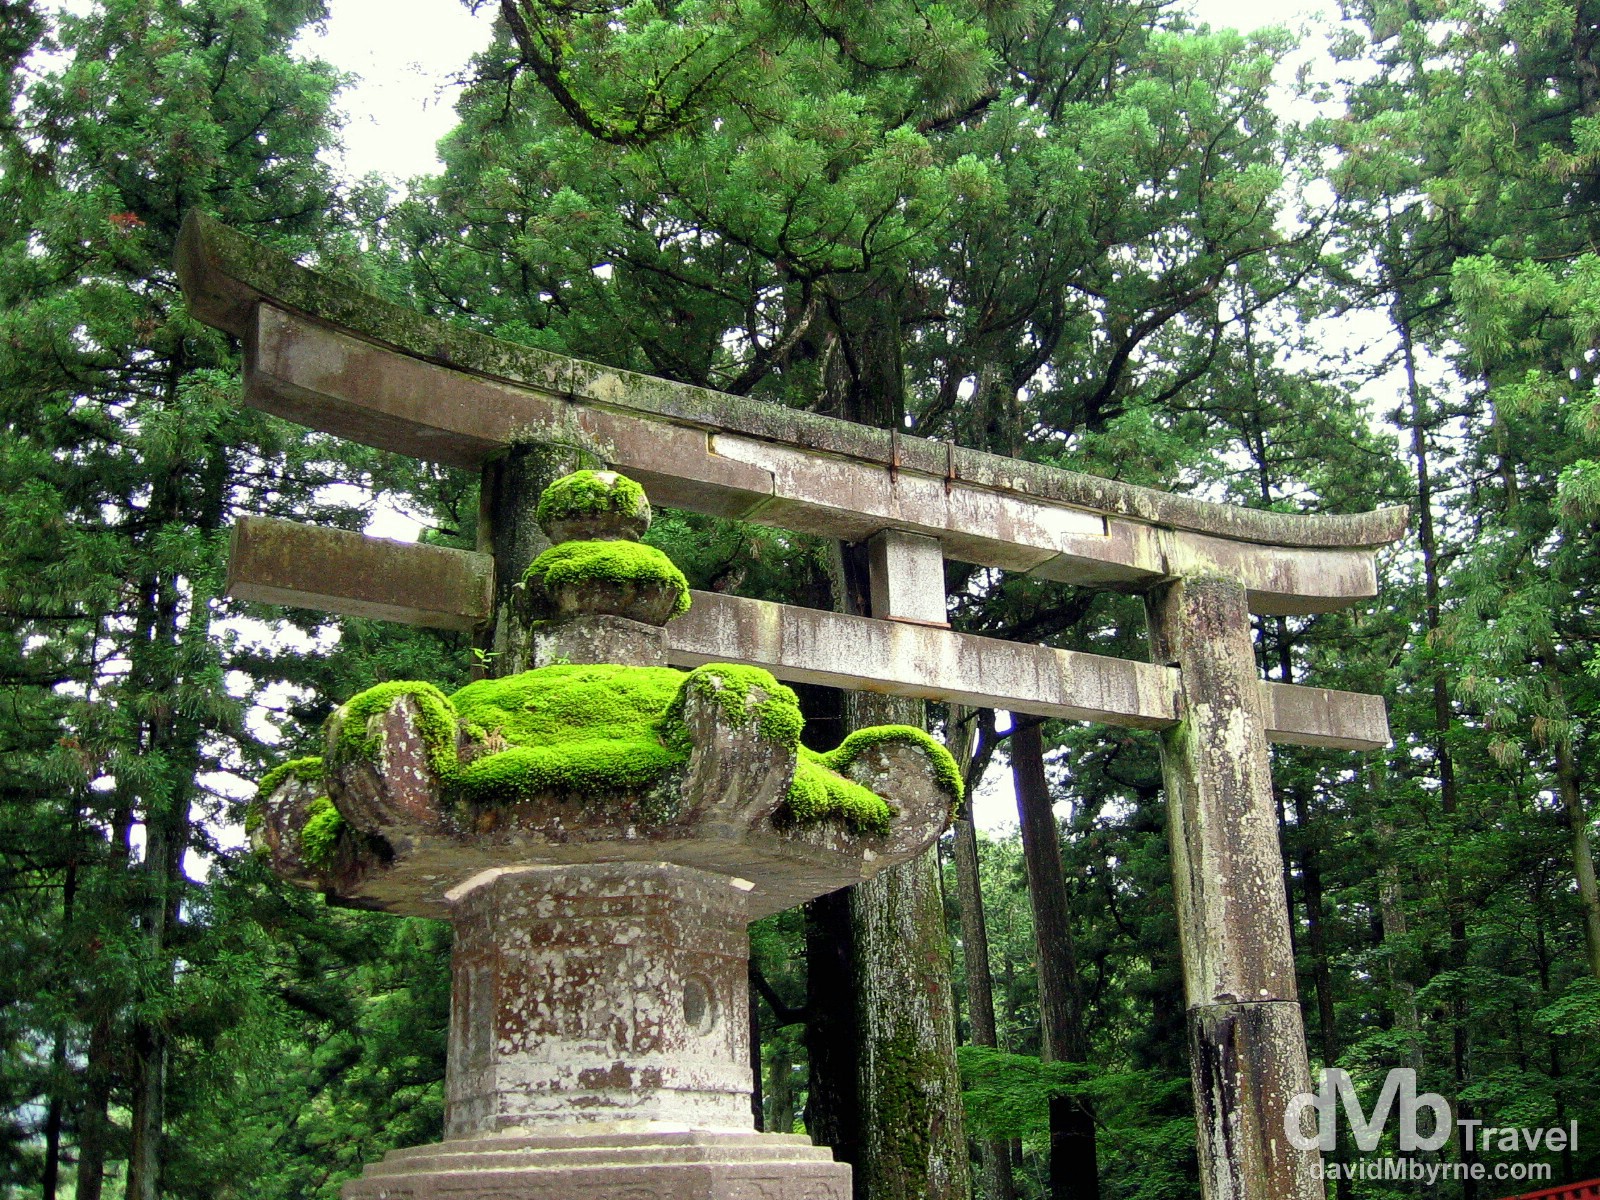 The torii gate at the entrance to the Toshogu Shinto shrine in Nikko, Honshu, Japan. July 17th 2005.